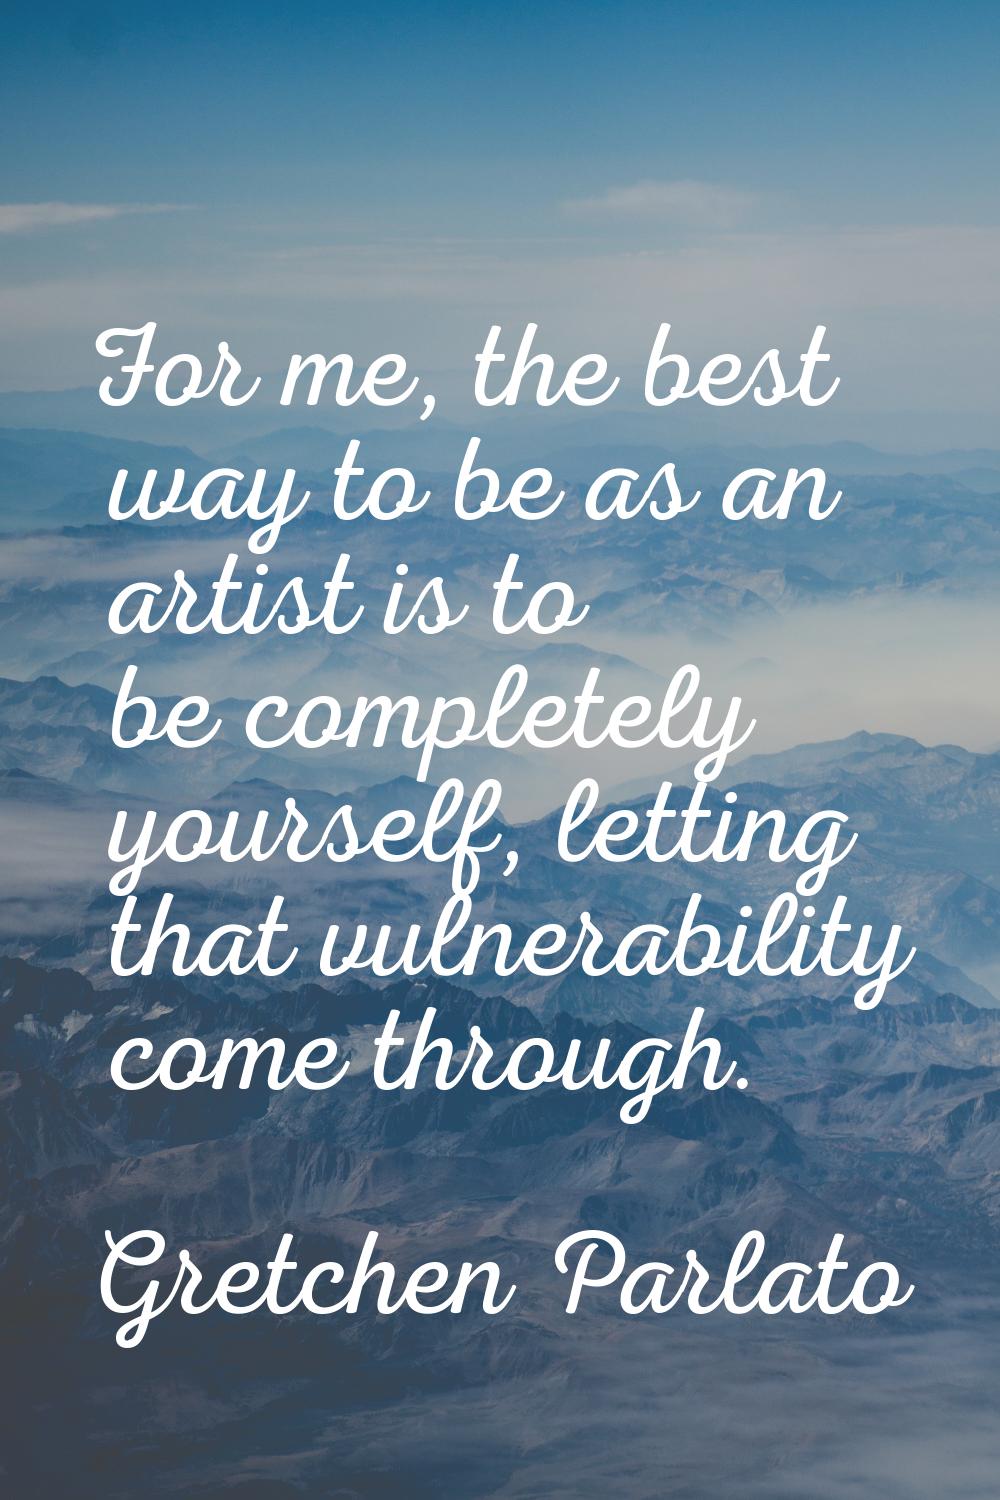 For me, the best way to be as an artist is to be completely yourself, letting that vulnerability co